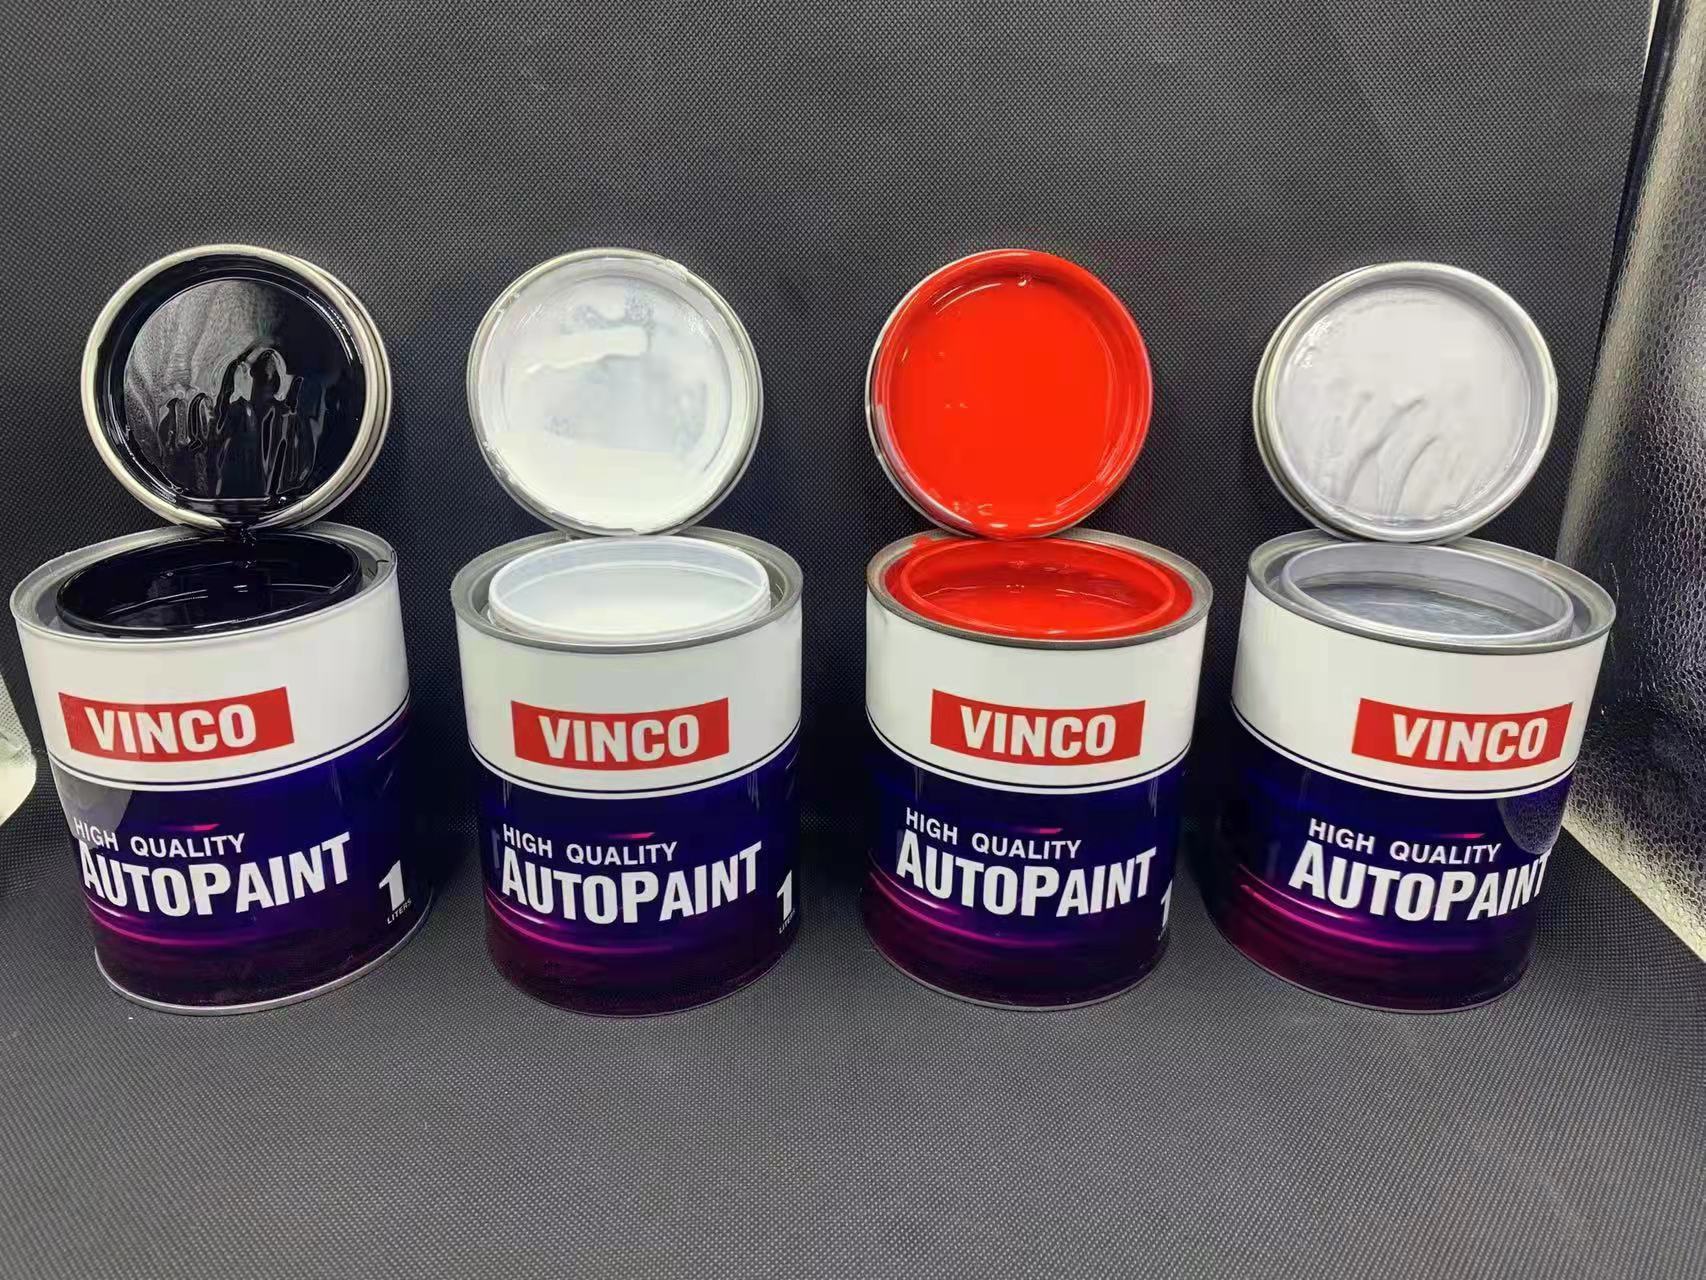 Upgrated tinters